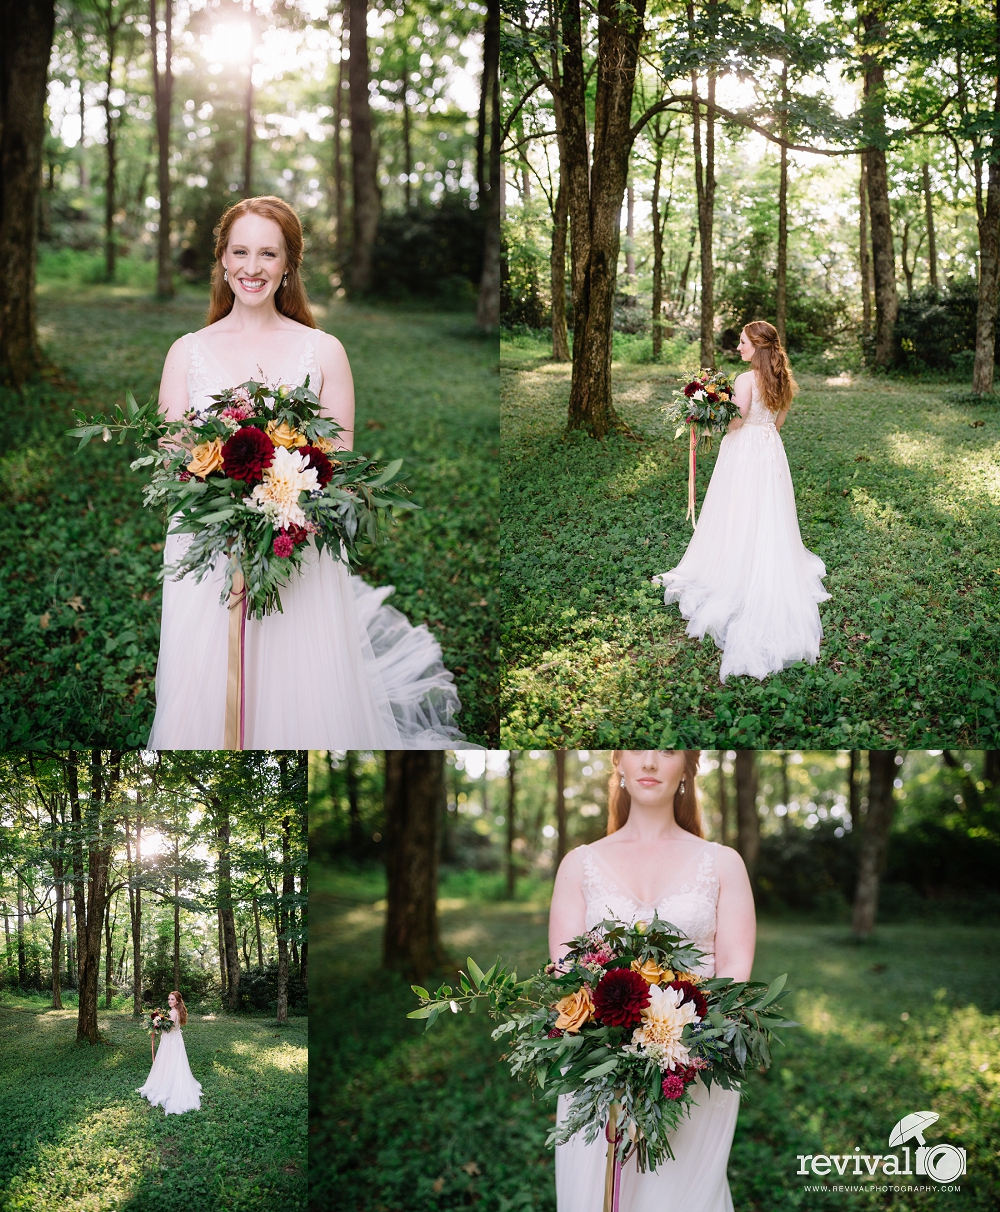 Bridal Session with Brittany at Westglow Spa in the Blue Ridge Mountains Photos by Revival Photography NC Husband and Wife Photographers www.revivalphotography.com